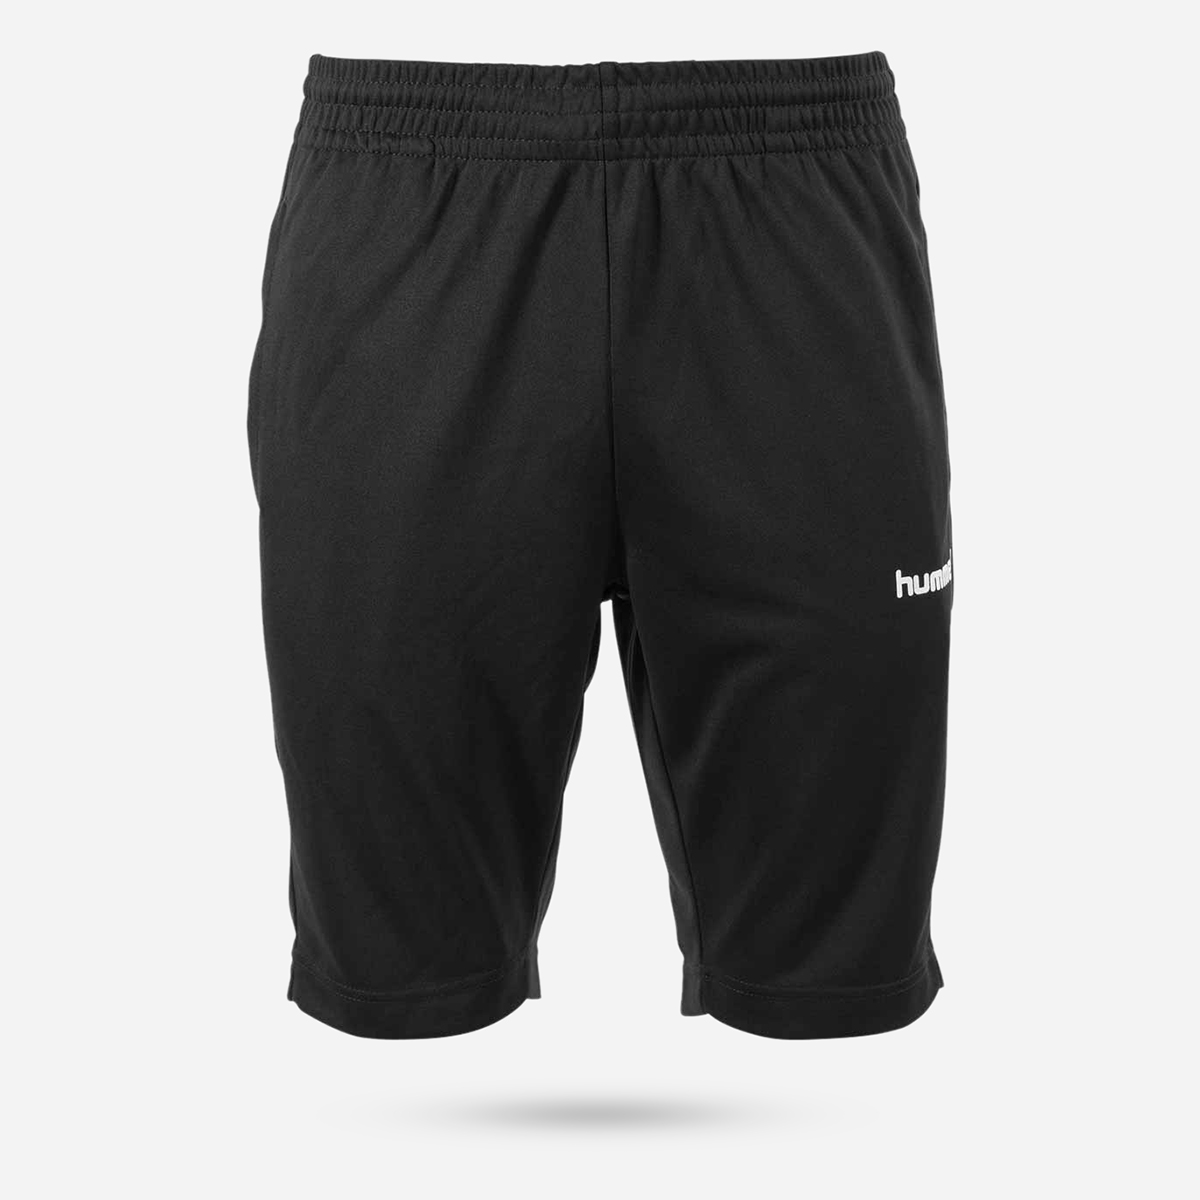 AN229870 Authentic Training Short